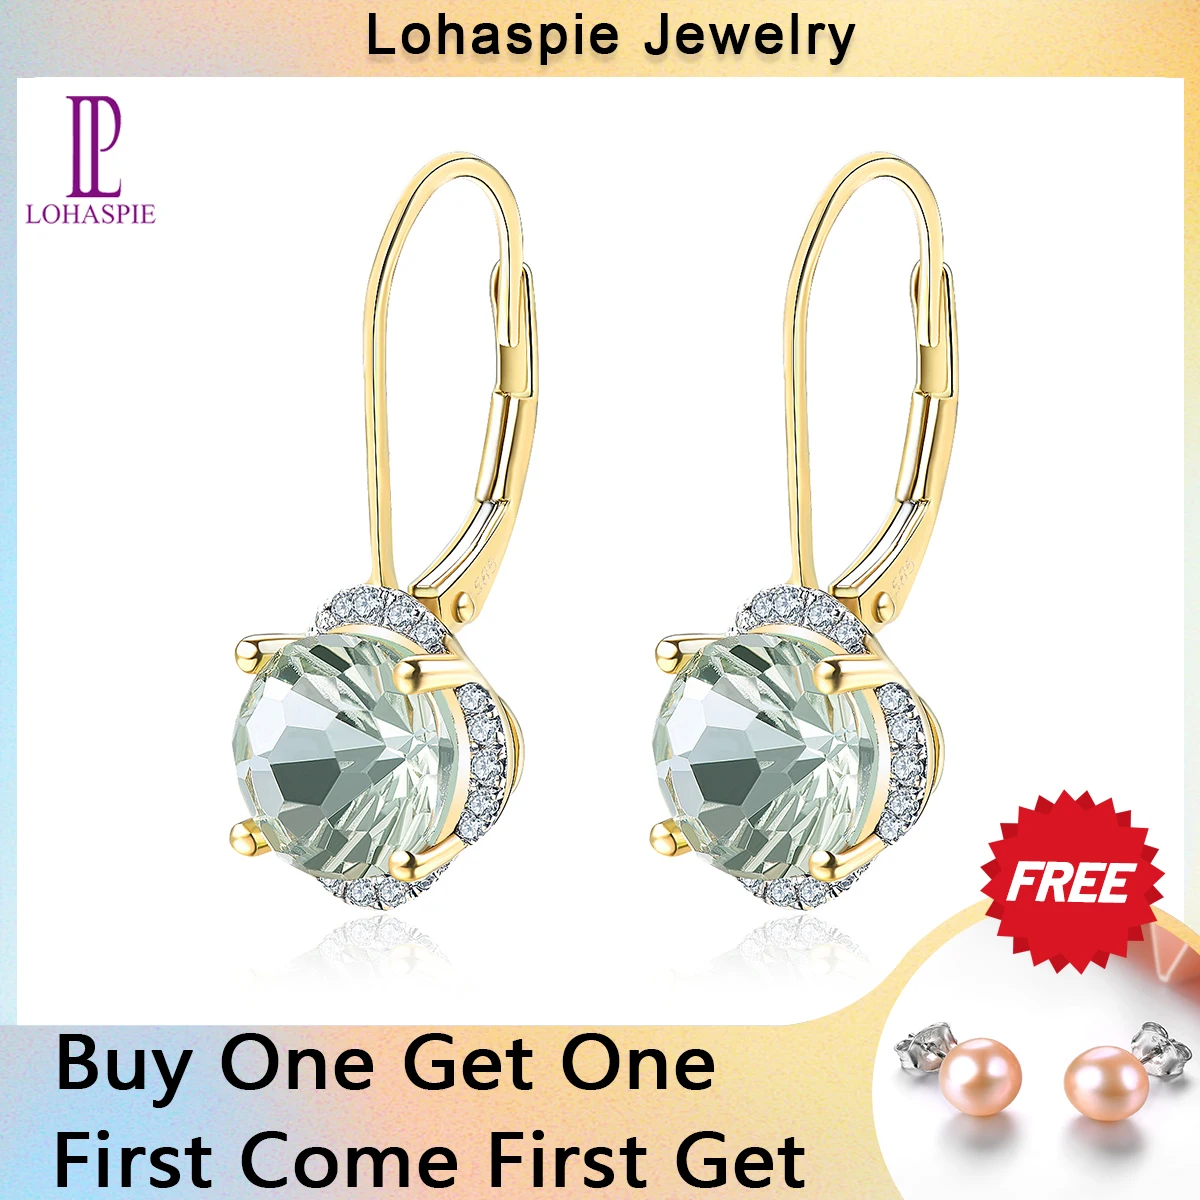 LP Solid 14 Karats Yellow Gold Diamond Earrings Natural Green Amethyst 3.79CT Special Daisy cutting Fine Gemstone Jewelry